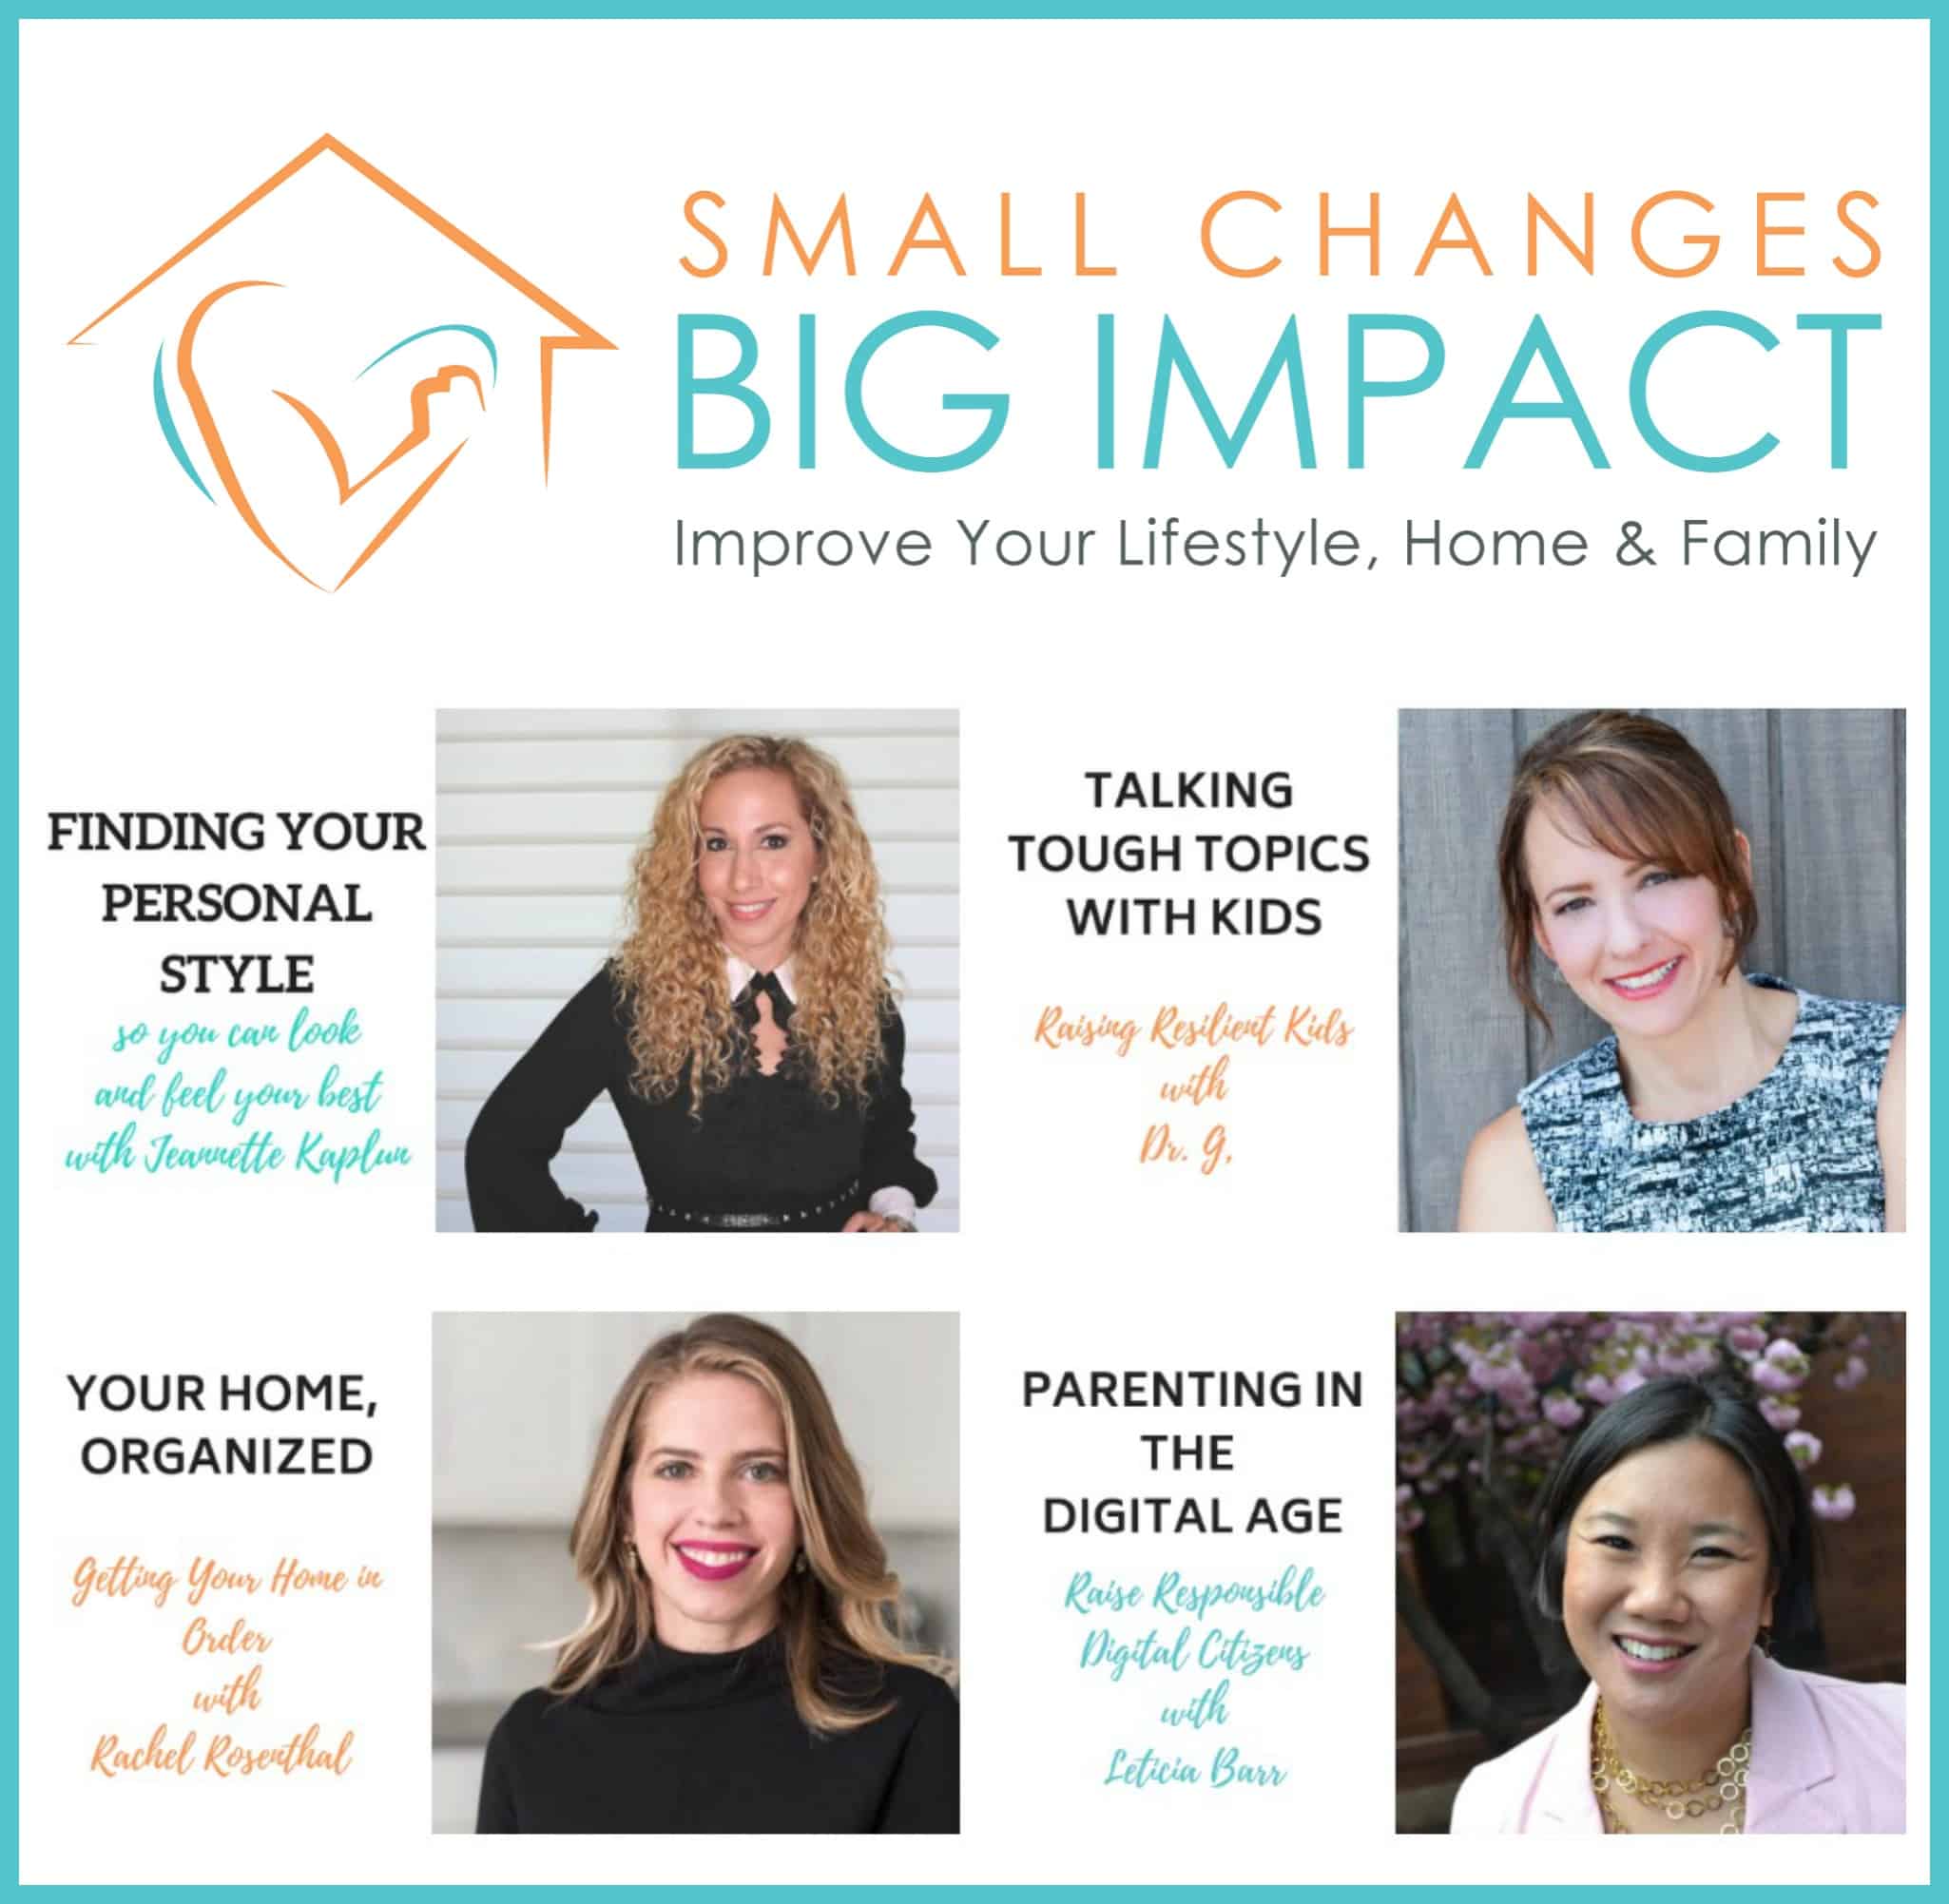 How Small Changes, Big Impact Can Help You Live the Life You Want!